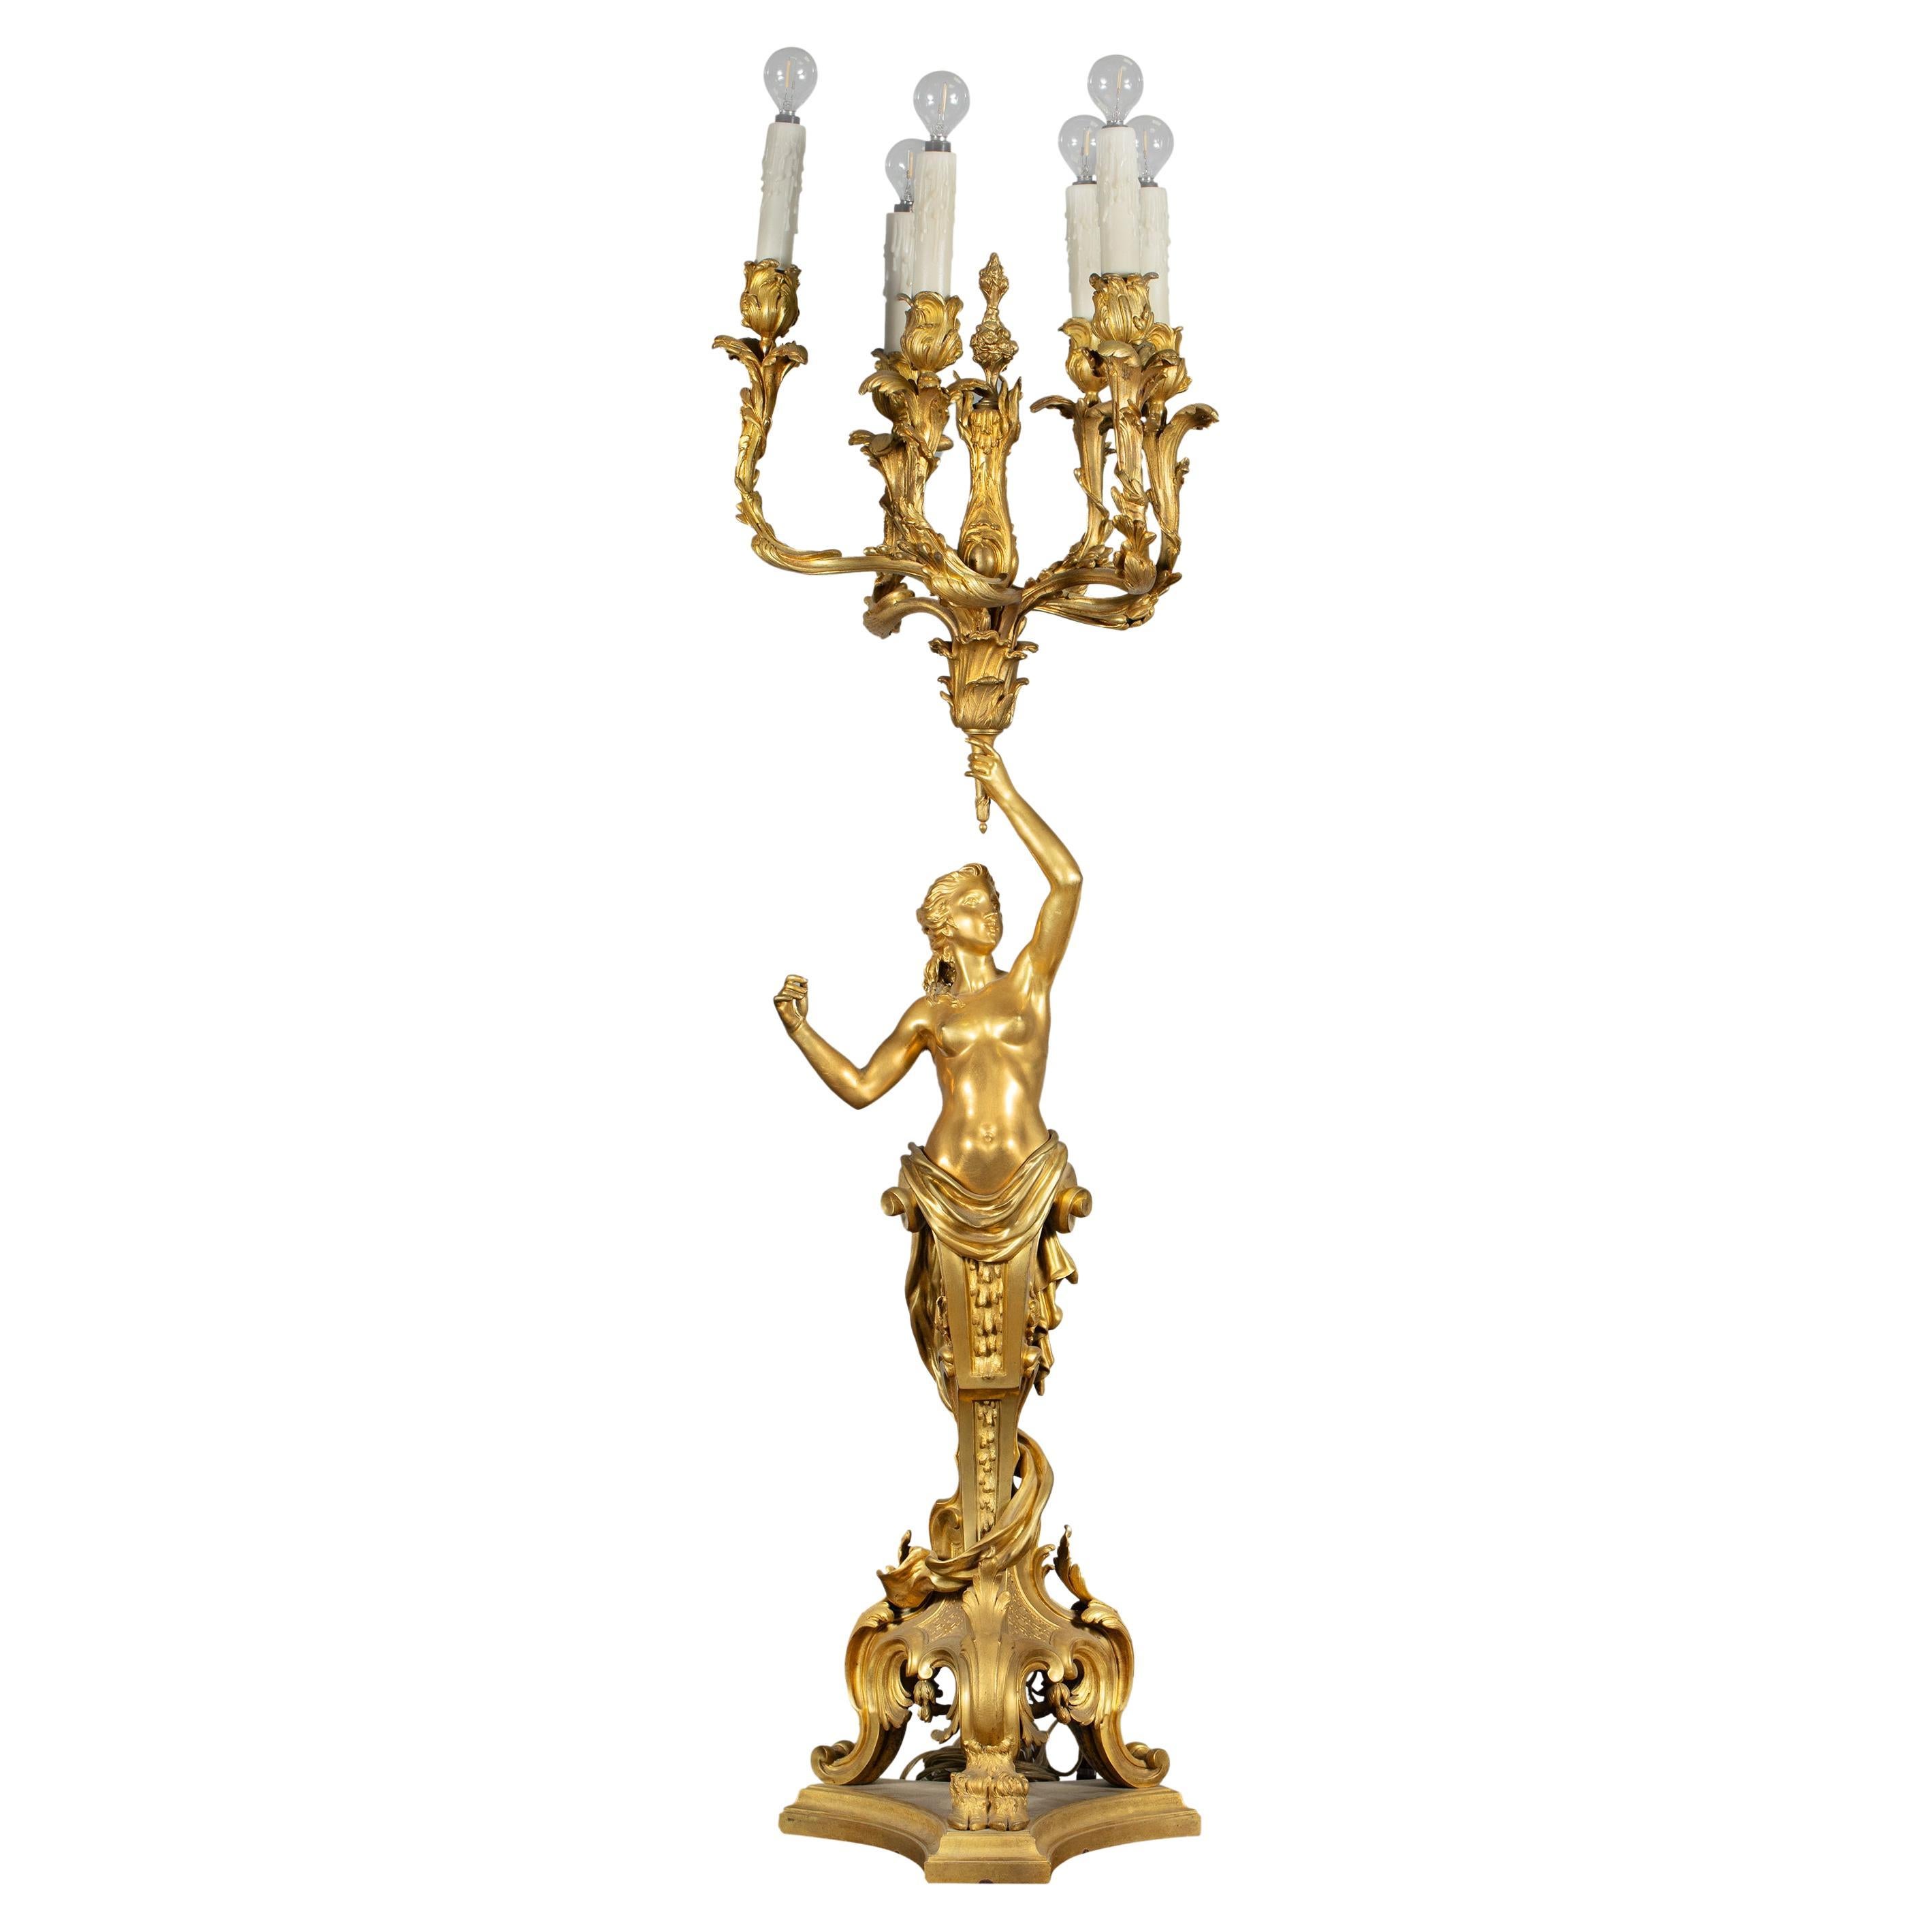 A Large French Gilt-Bronze Centerpiece Candelabra After Clodion, 19th Century